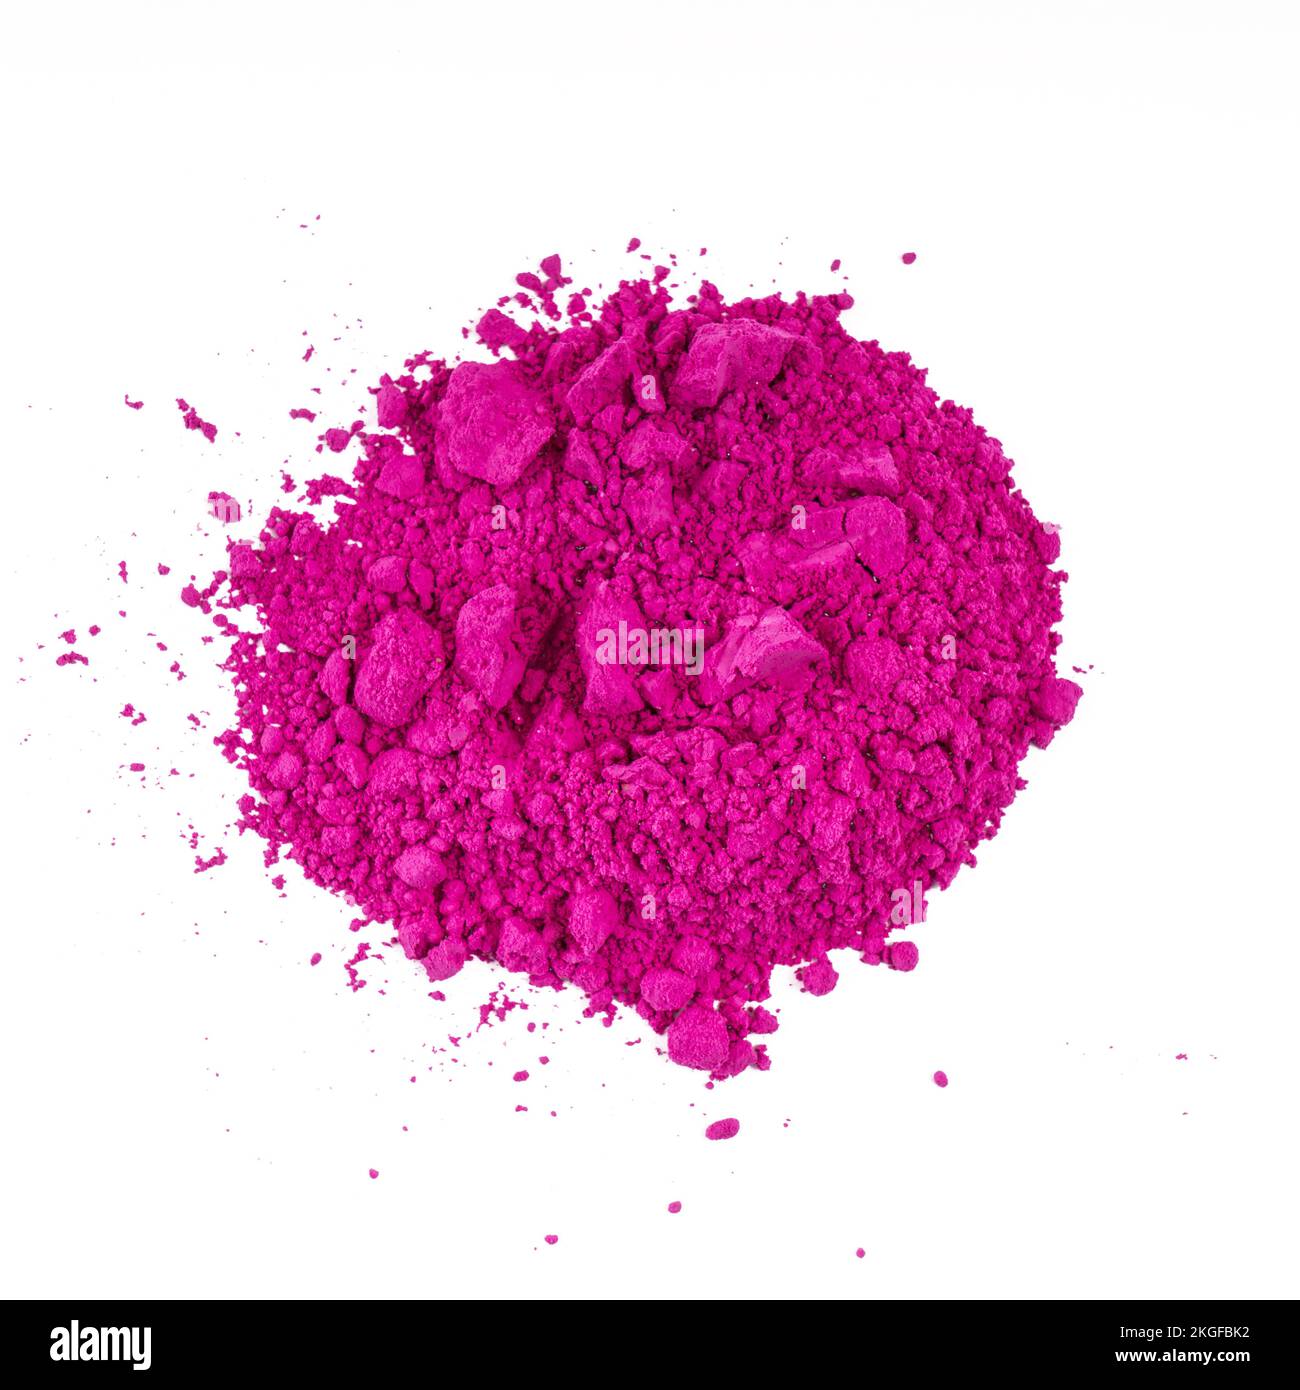 a small pile of pink powder on a transparent surface Stock Photo